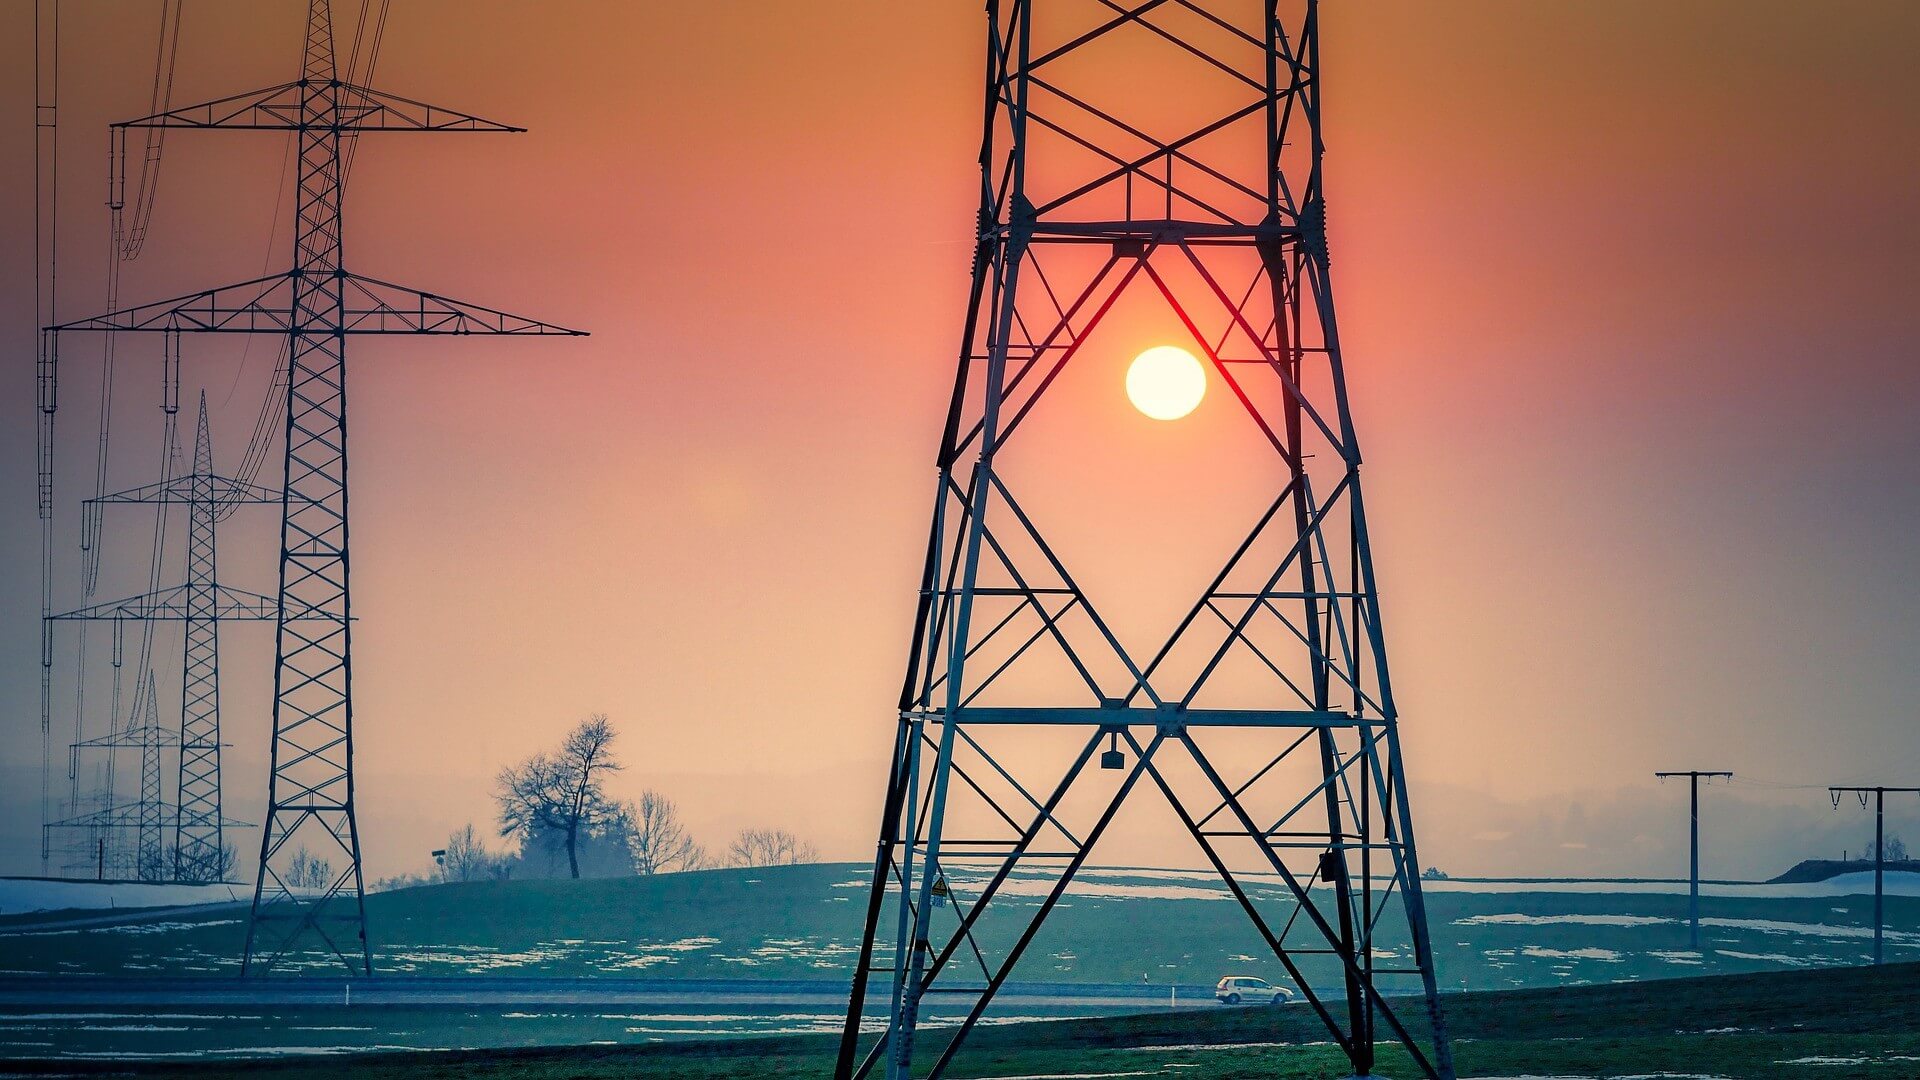 Silhouetted pylons and transmission lines set against orange sunset sky